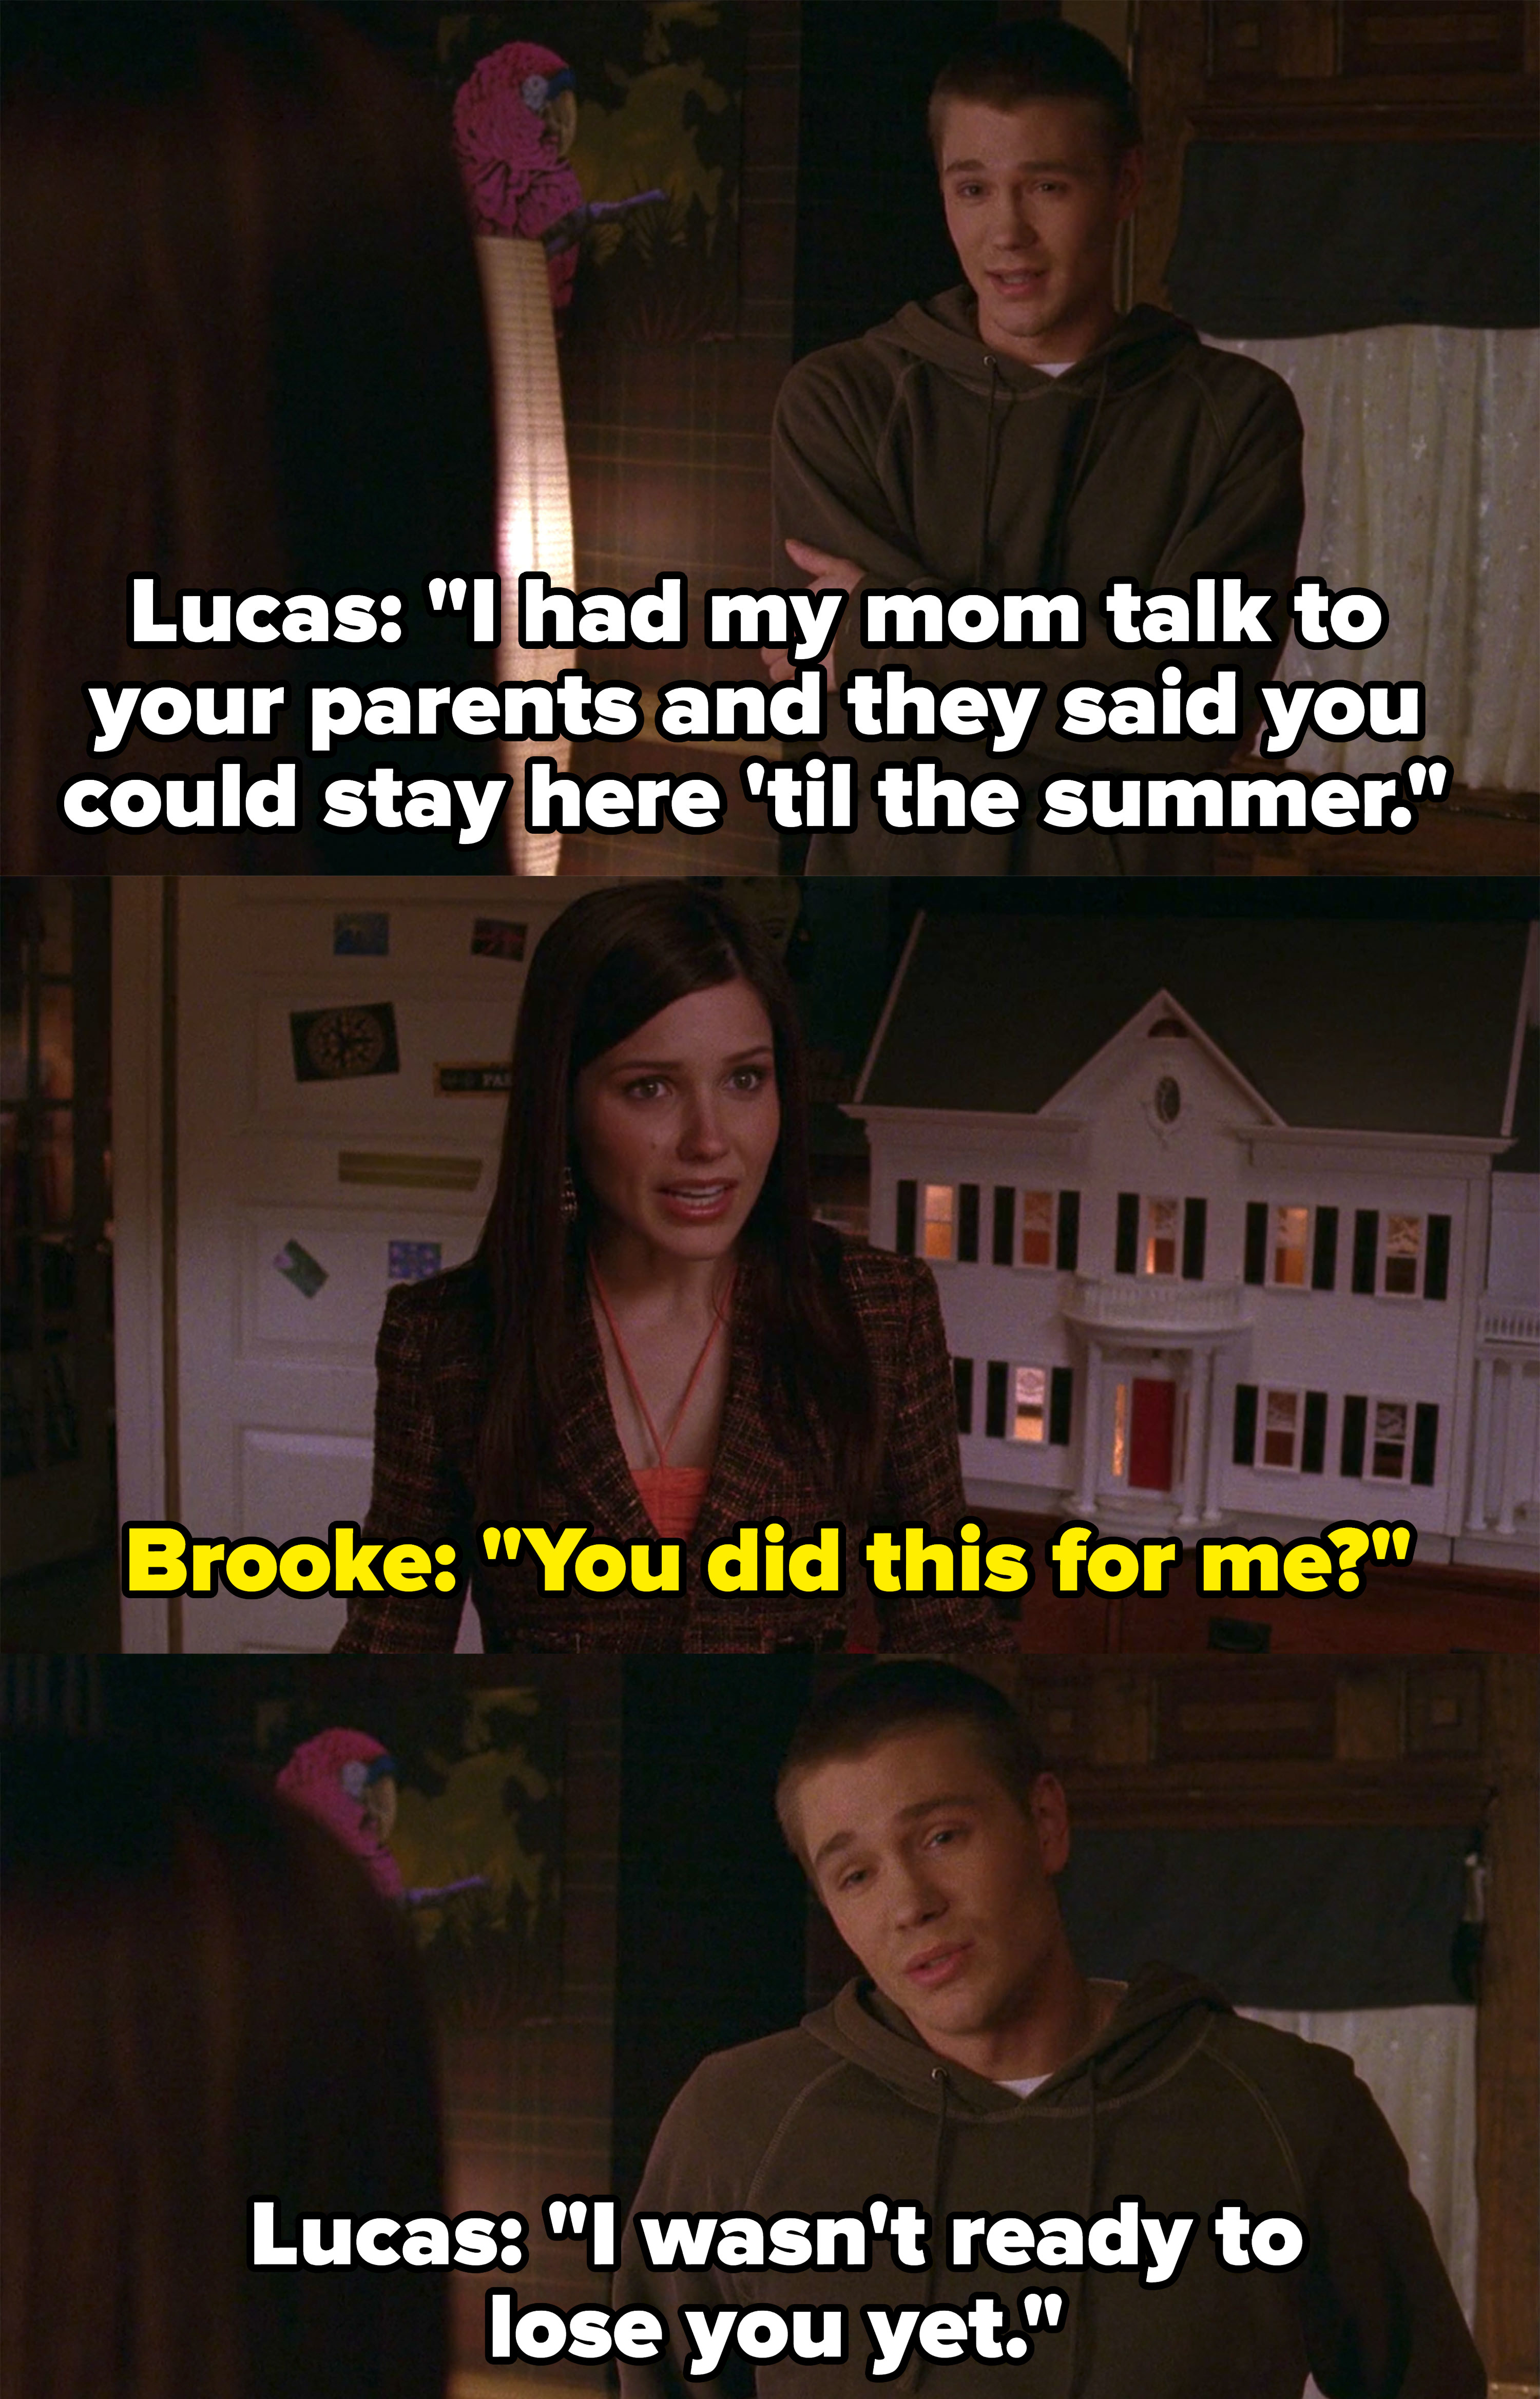 Lucas tells Brooke he &quot;wasn&#x27;t ready to lose her yet&quot;